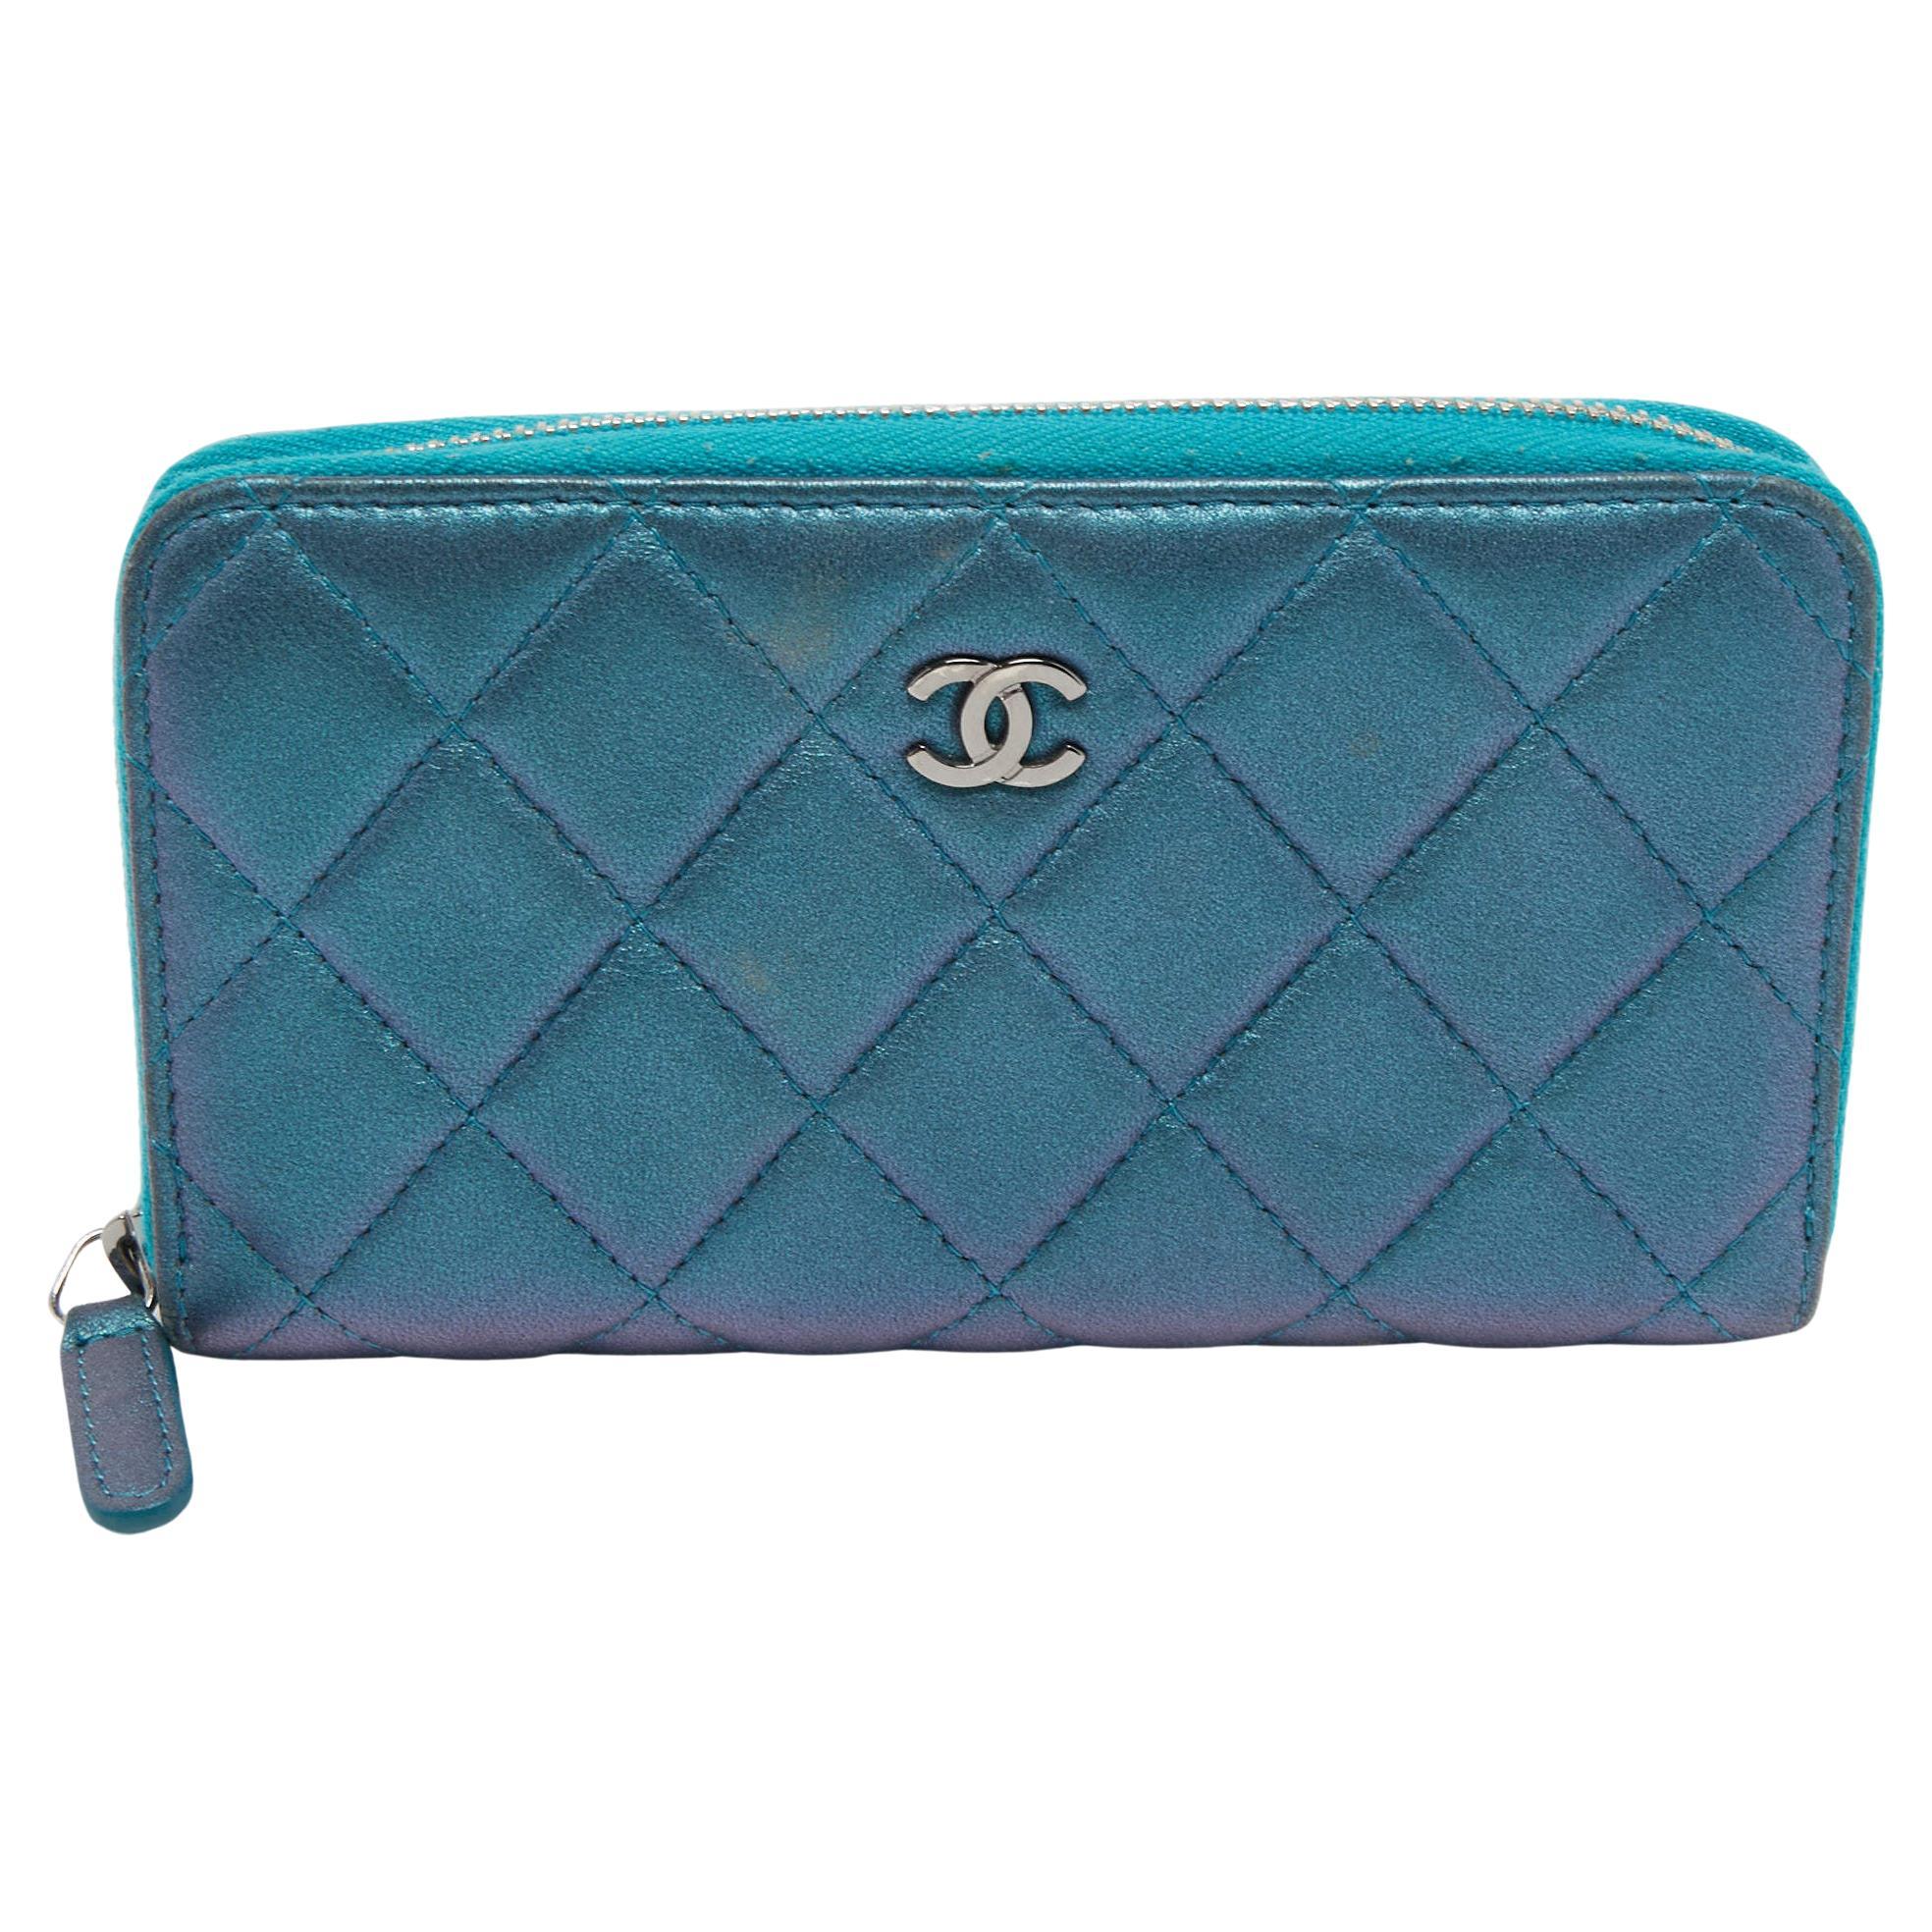 Chanel Classic Wallets - 58 For Sale on 1stDibs  chanel classic zipped  wallet, chanel wallet, chanel classic card holder